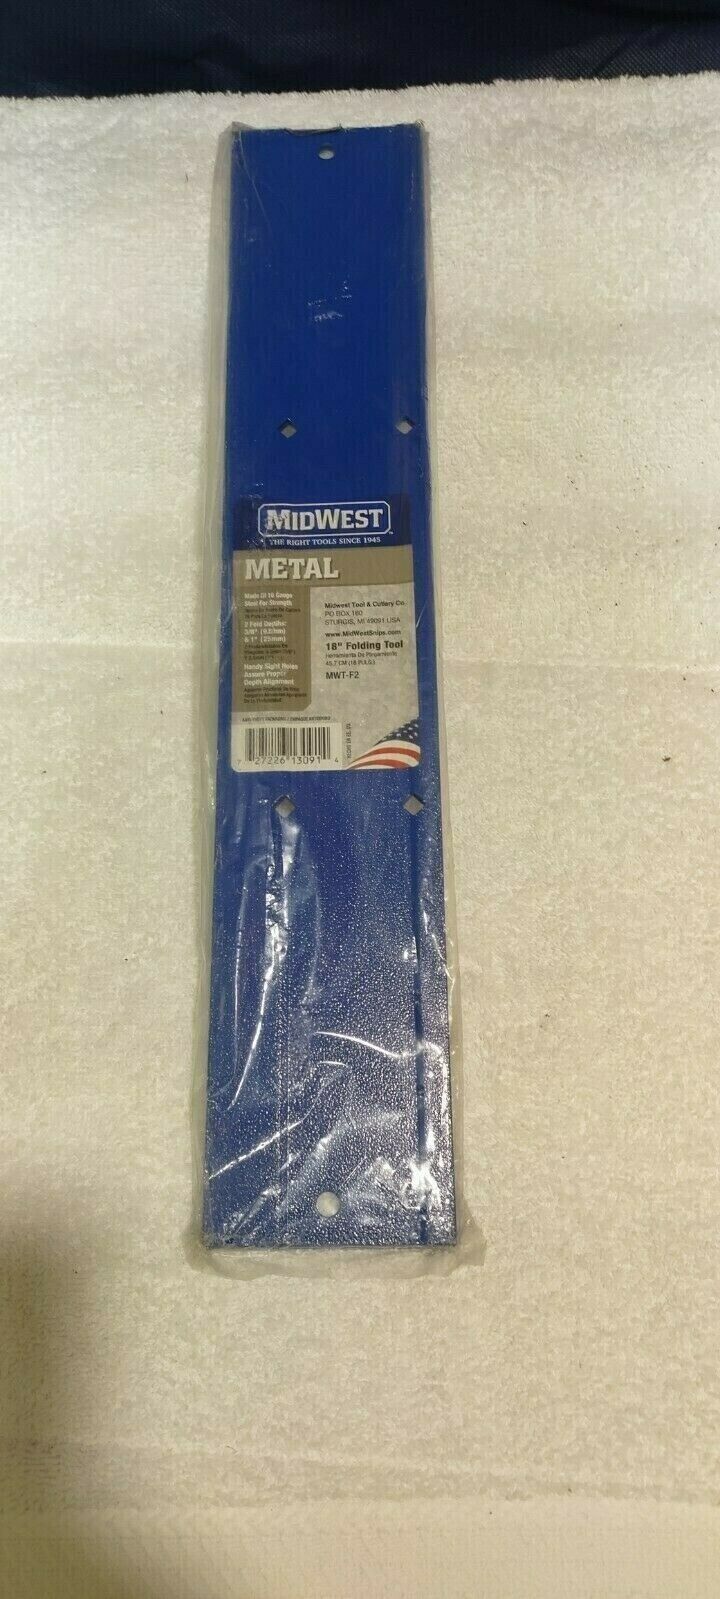 Primary image for New, Midwest Metal 18" Folding Tool MWT-F2 16 Gauge Steel